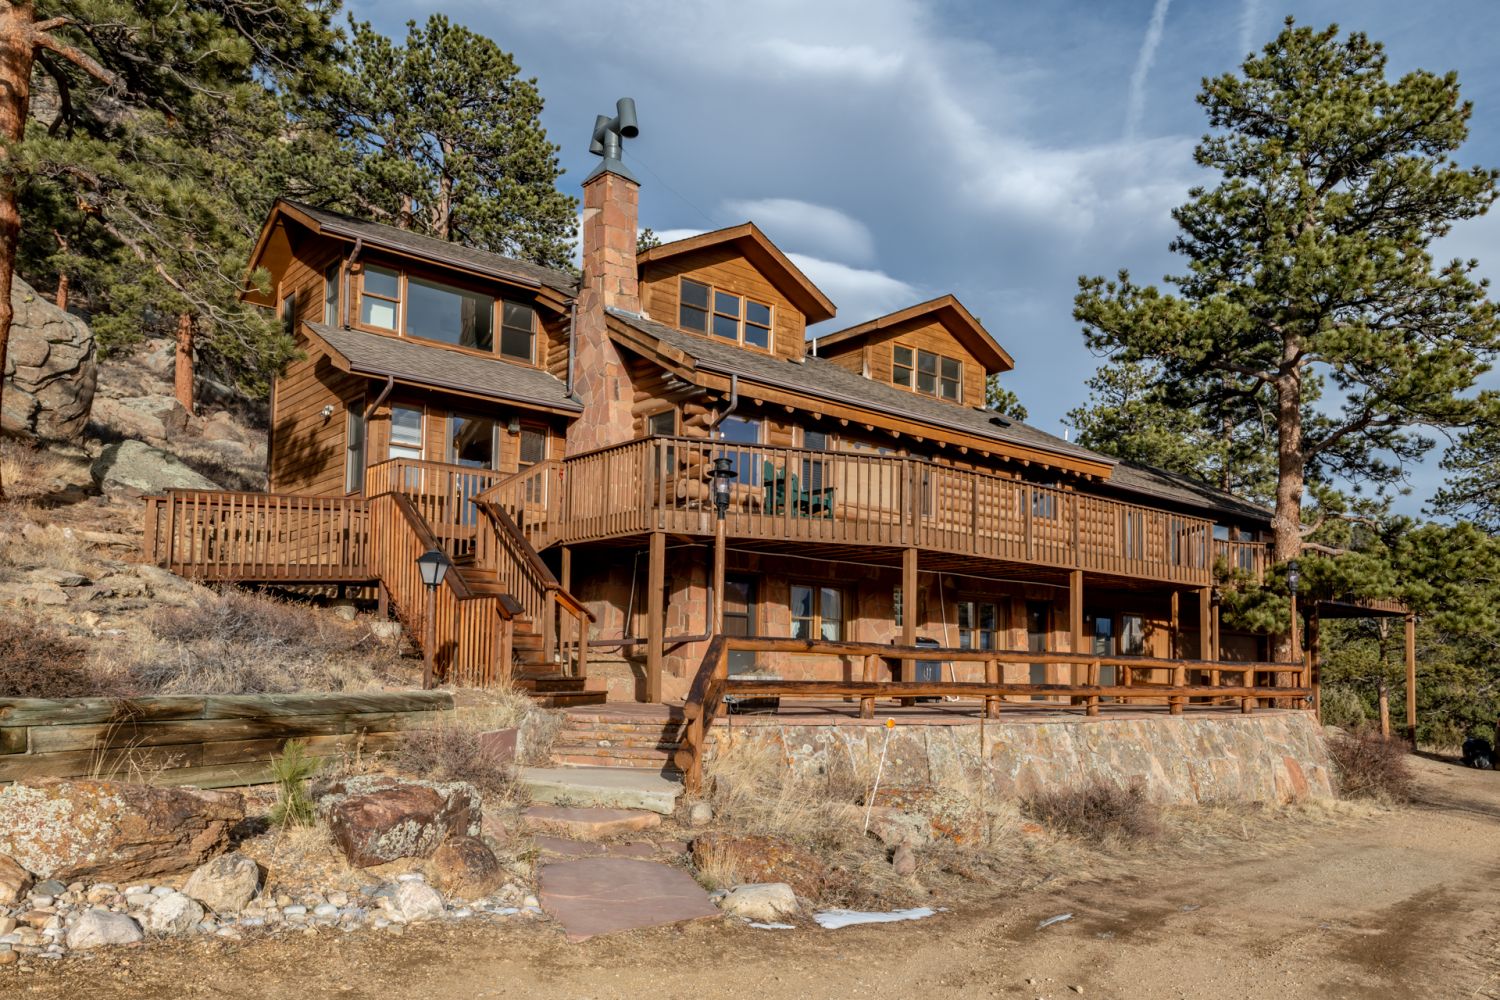 Bishop's Retreat - The expansive log exterior of Bishop's Retreat beckons you into the ultimate Rocky Mountain getaway home.